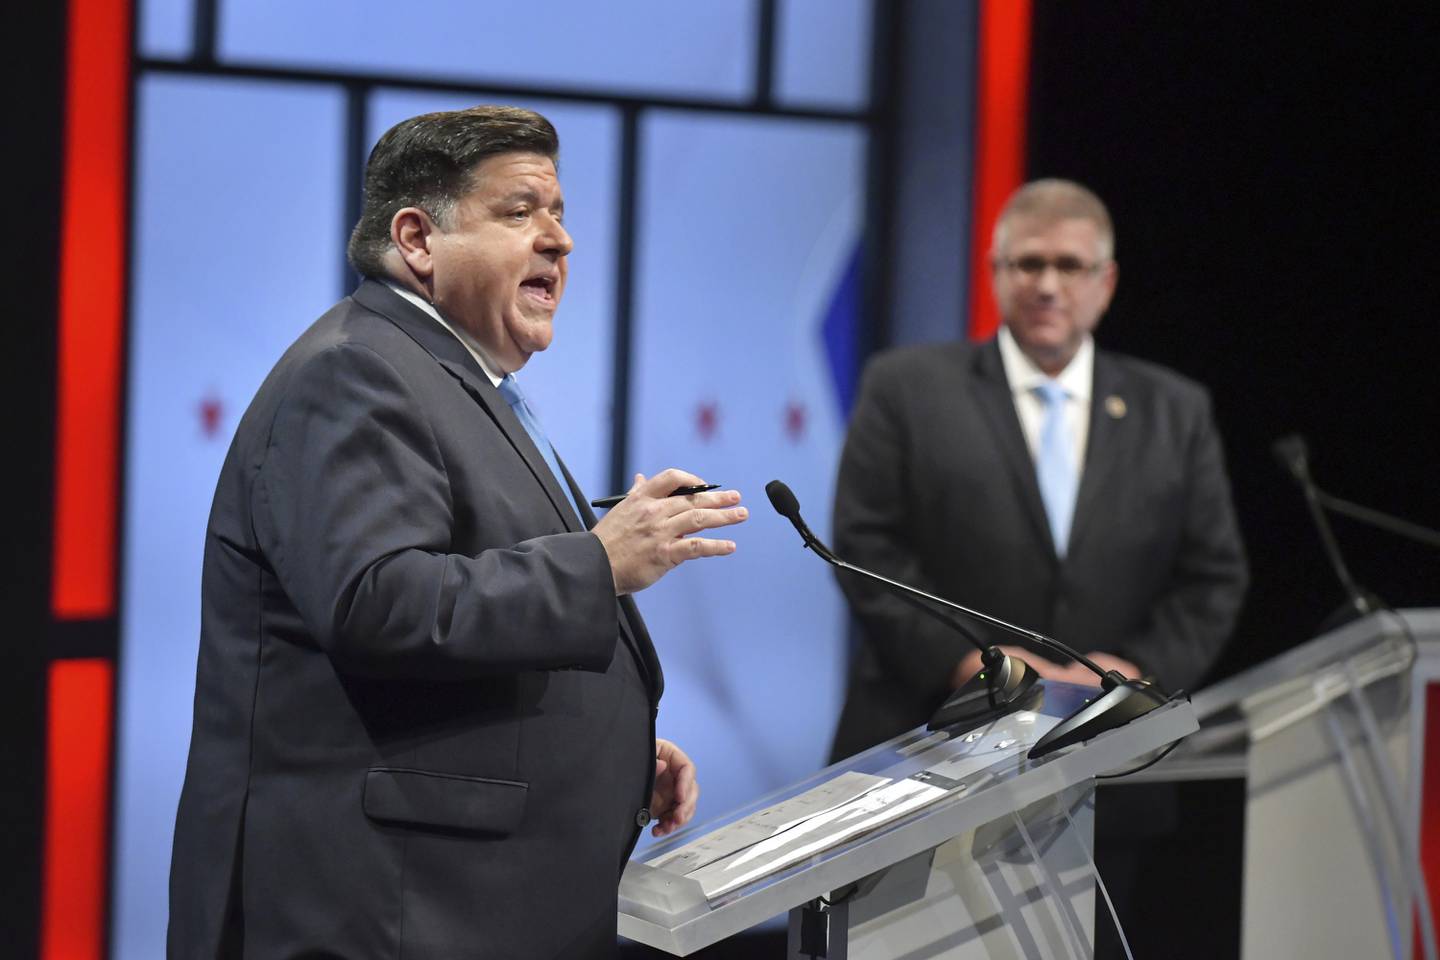 Illinois Gov. JB Pritzker, left, speaks as his Republican challenger state Sen. Darren Bailey, right, listens during the Illinois Governor's Debate on the stage in Braden Auditorium at the campus of Illinois State University in Normal, Ill., Thursday, Oct.6, 2022 (Ron Johnson/Illinois State University via AP, Pool)